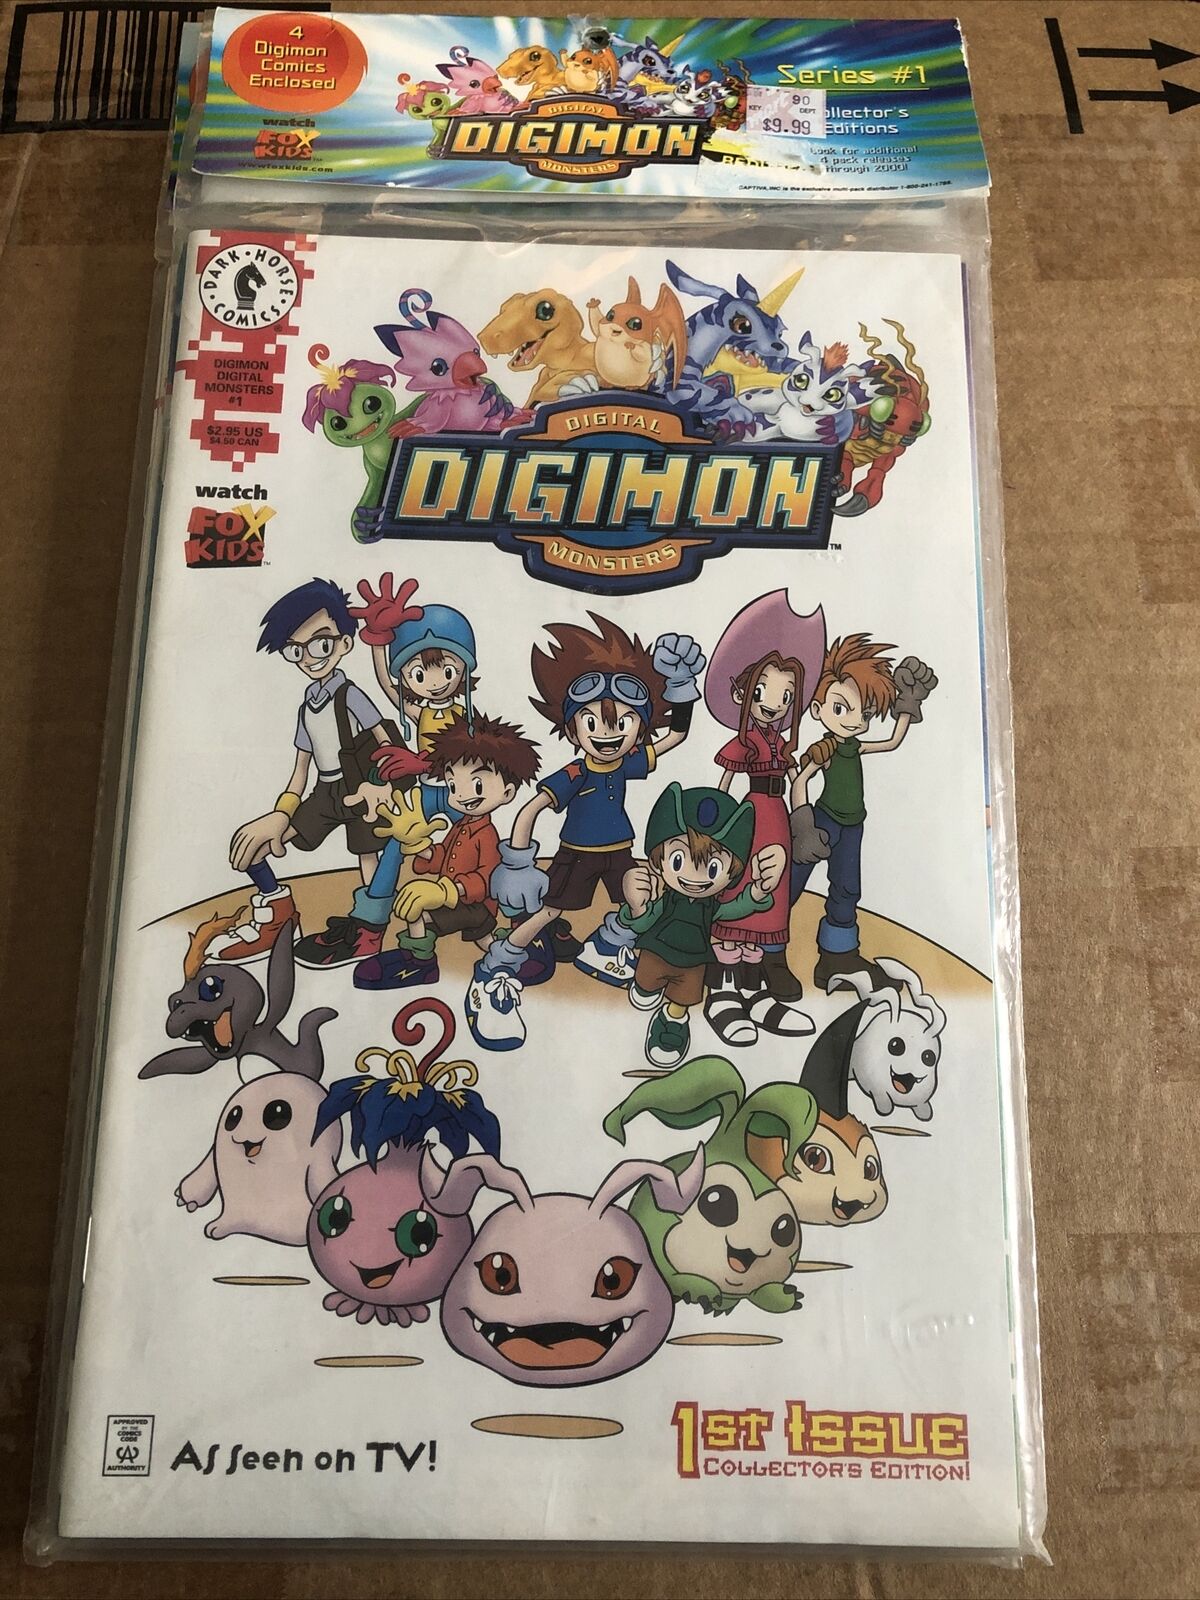 Digimon 2000 4 pack comic books mint in package. Collectors edition #1